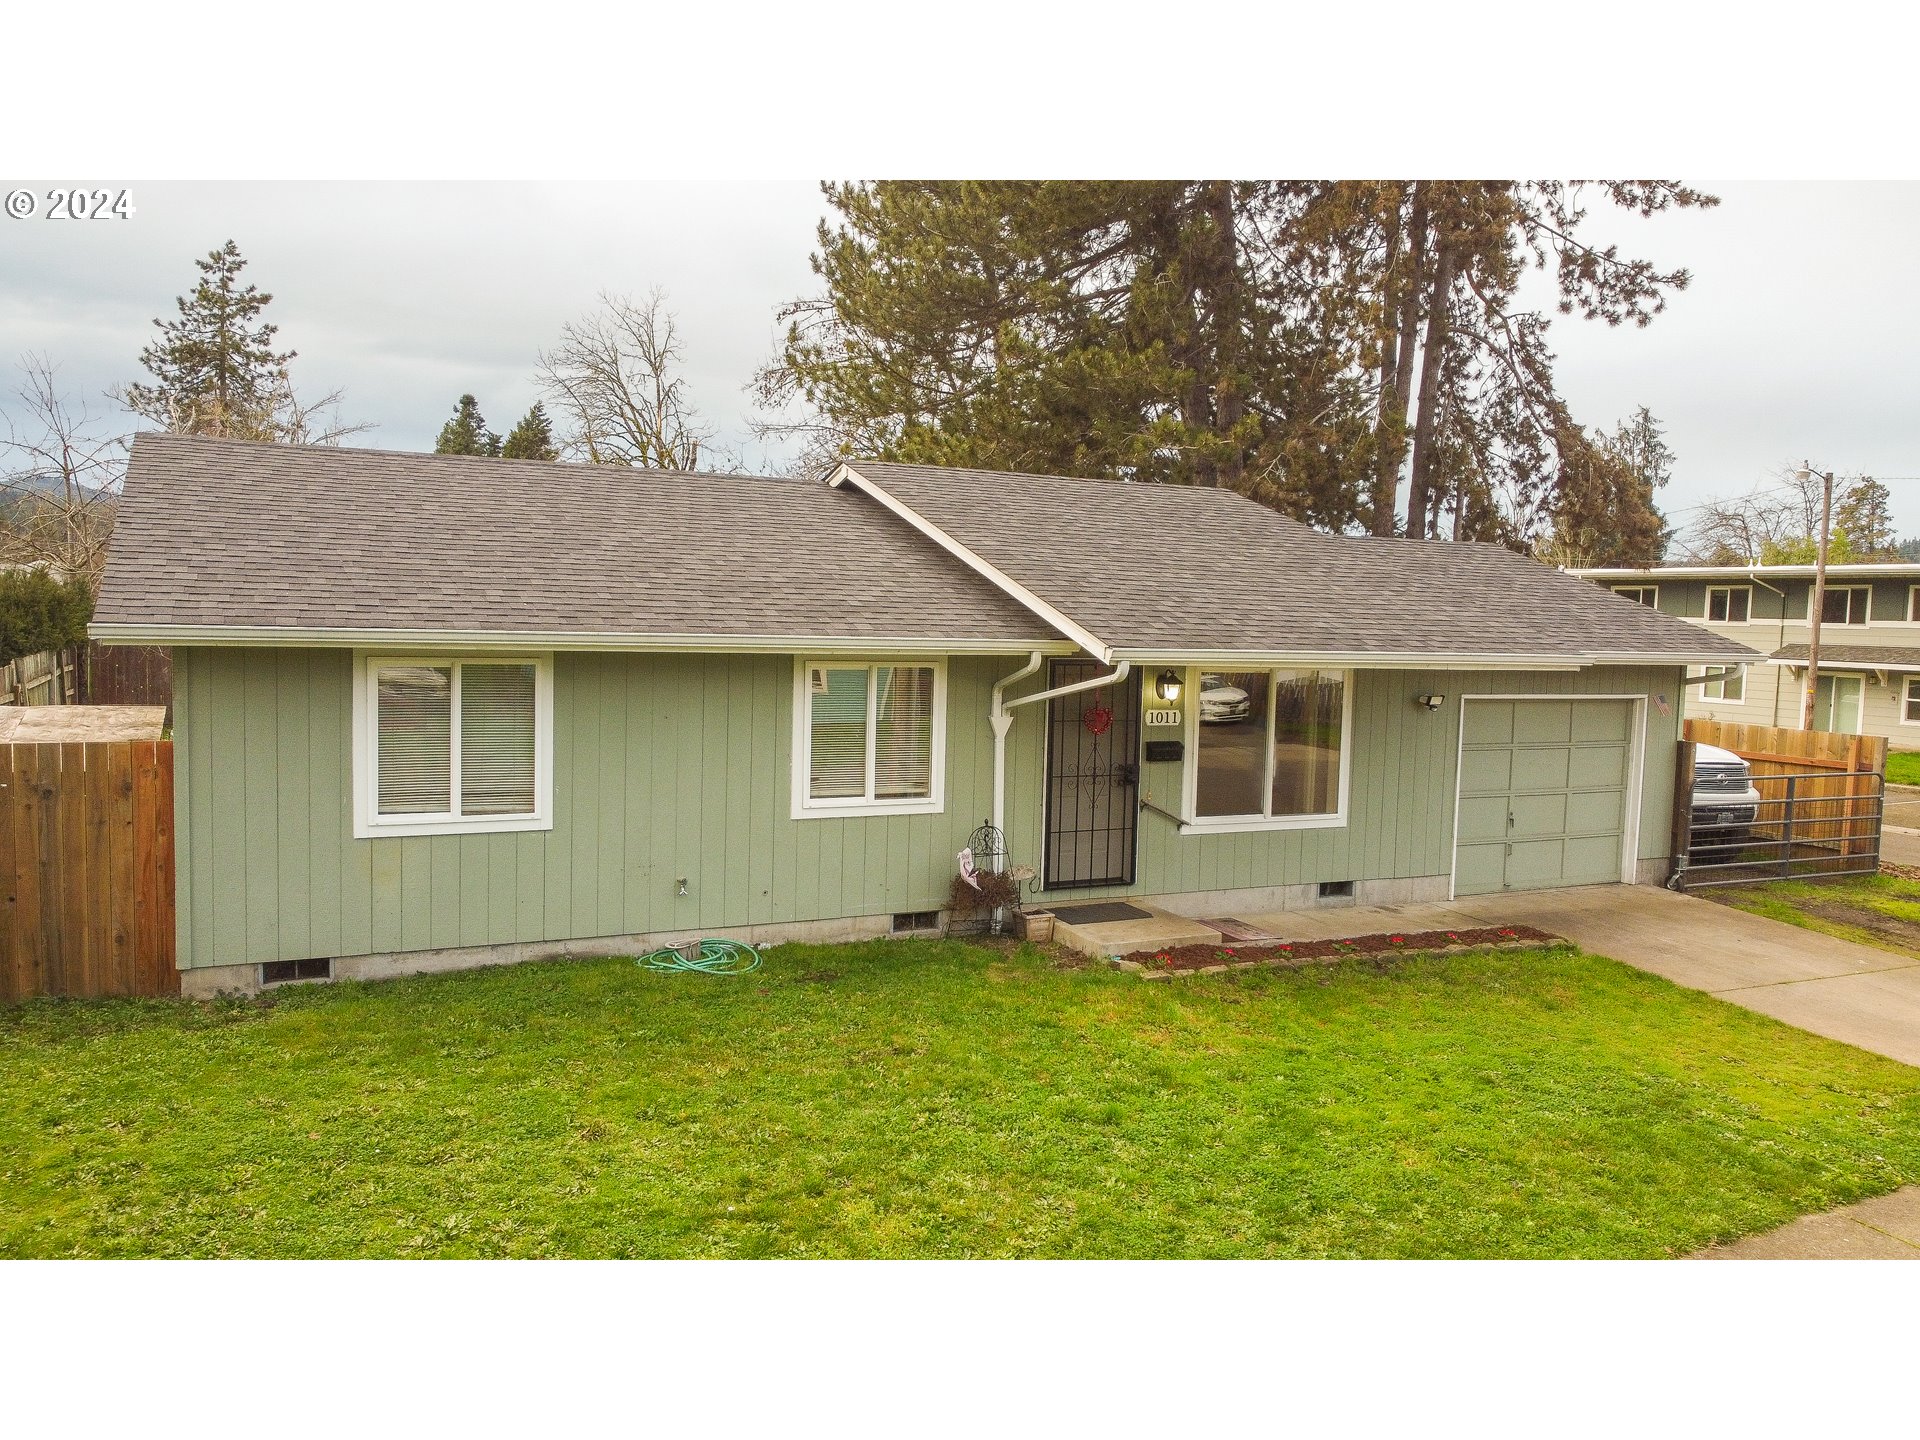 1011 S 8TH ST Eugene Home Listings - Galand Haas Real Estate